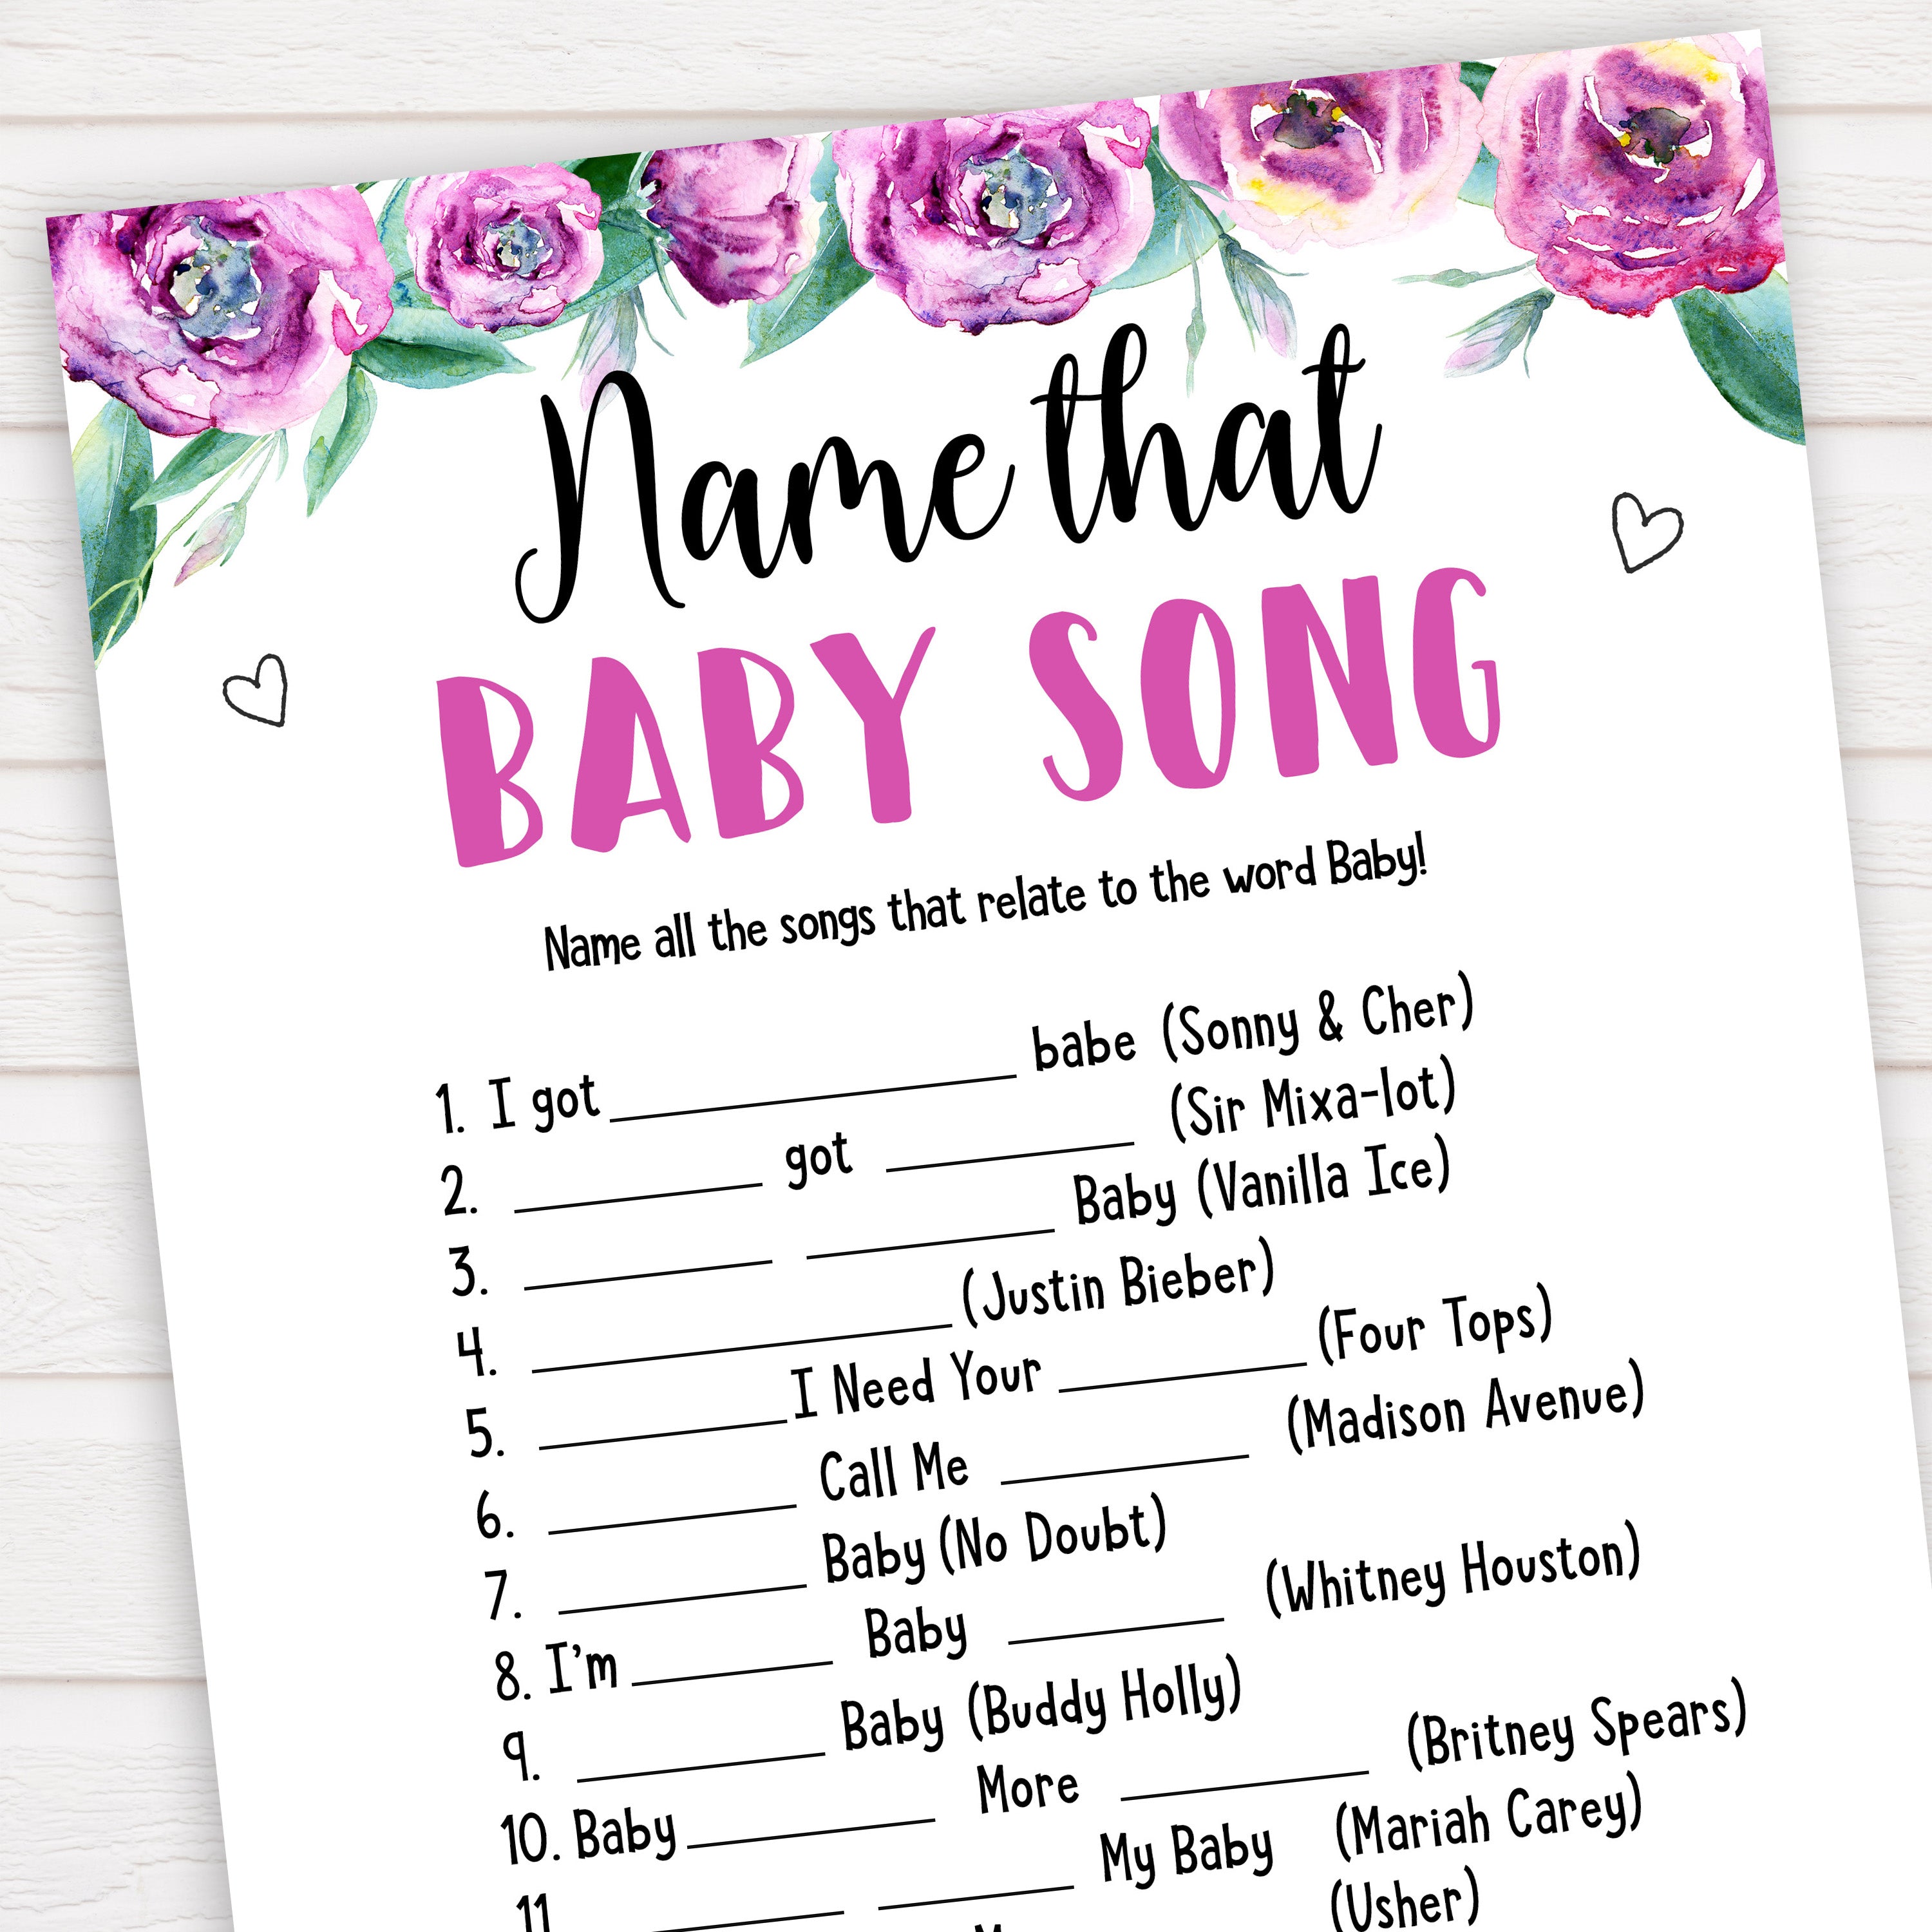 Purple peonies name that baby song baby shower games, printable baby shower games, fun baby shower games, baby shower games, popular baby shower games, floral baby shower games, purple baby shower themes